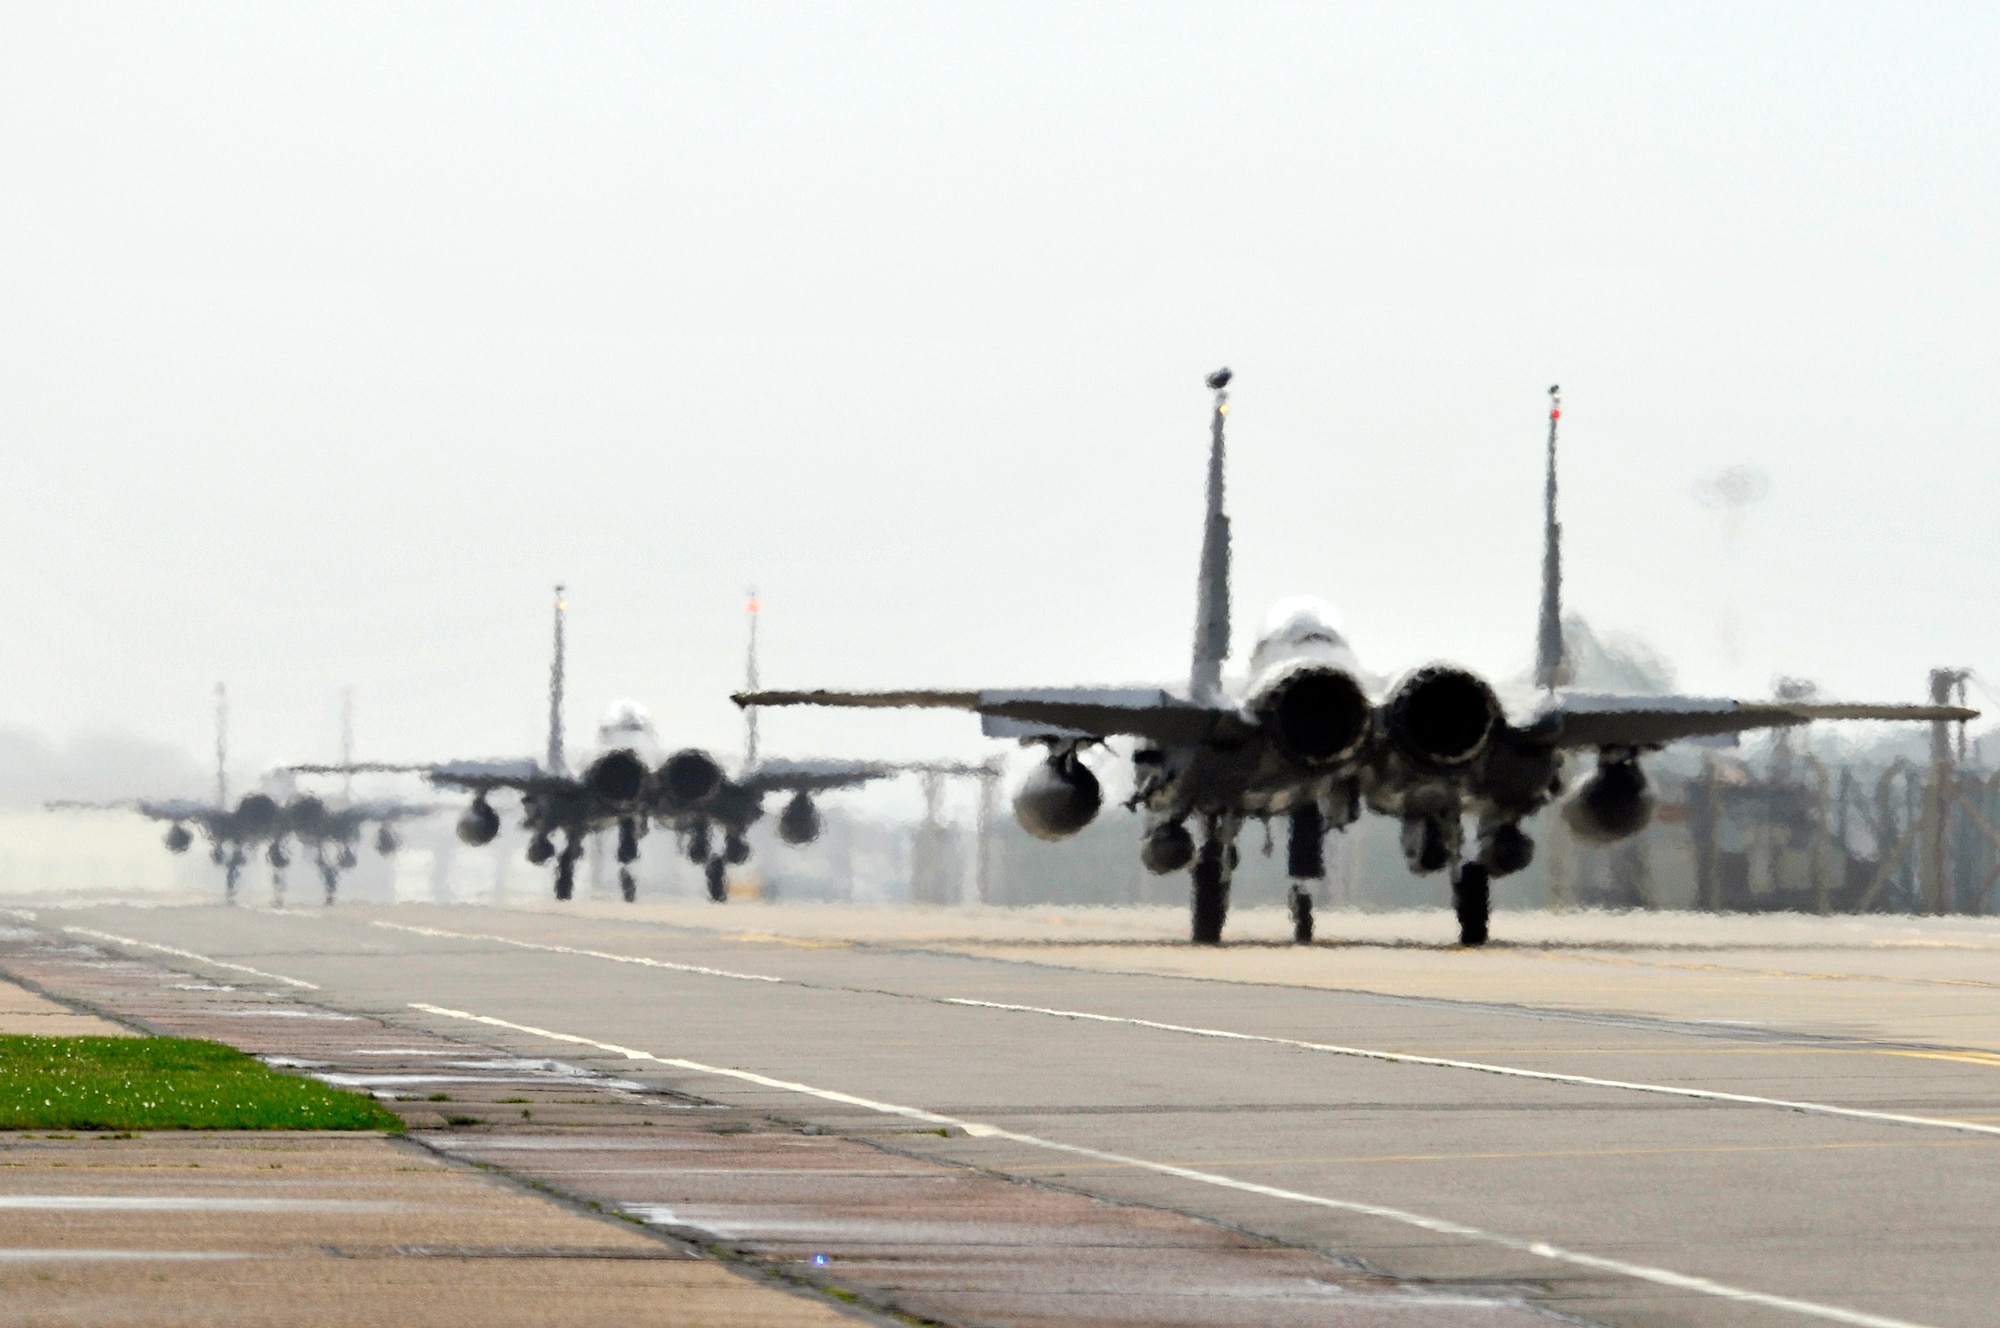 ROYAL AIR FORCE LAKENHEATH, England -- Three F-15E Strike Eagles taxi to the runway here April 17, 2009. The 494th Fighter Squadron departed Friday morning to participate in the Strike Lance 2009 exercise at Campia Turzii, Romania. (U.S. Air Force photo by Airman 1st Class Perry Aston) (Released)